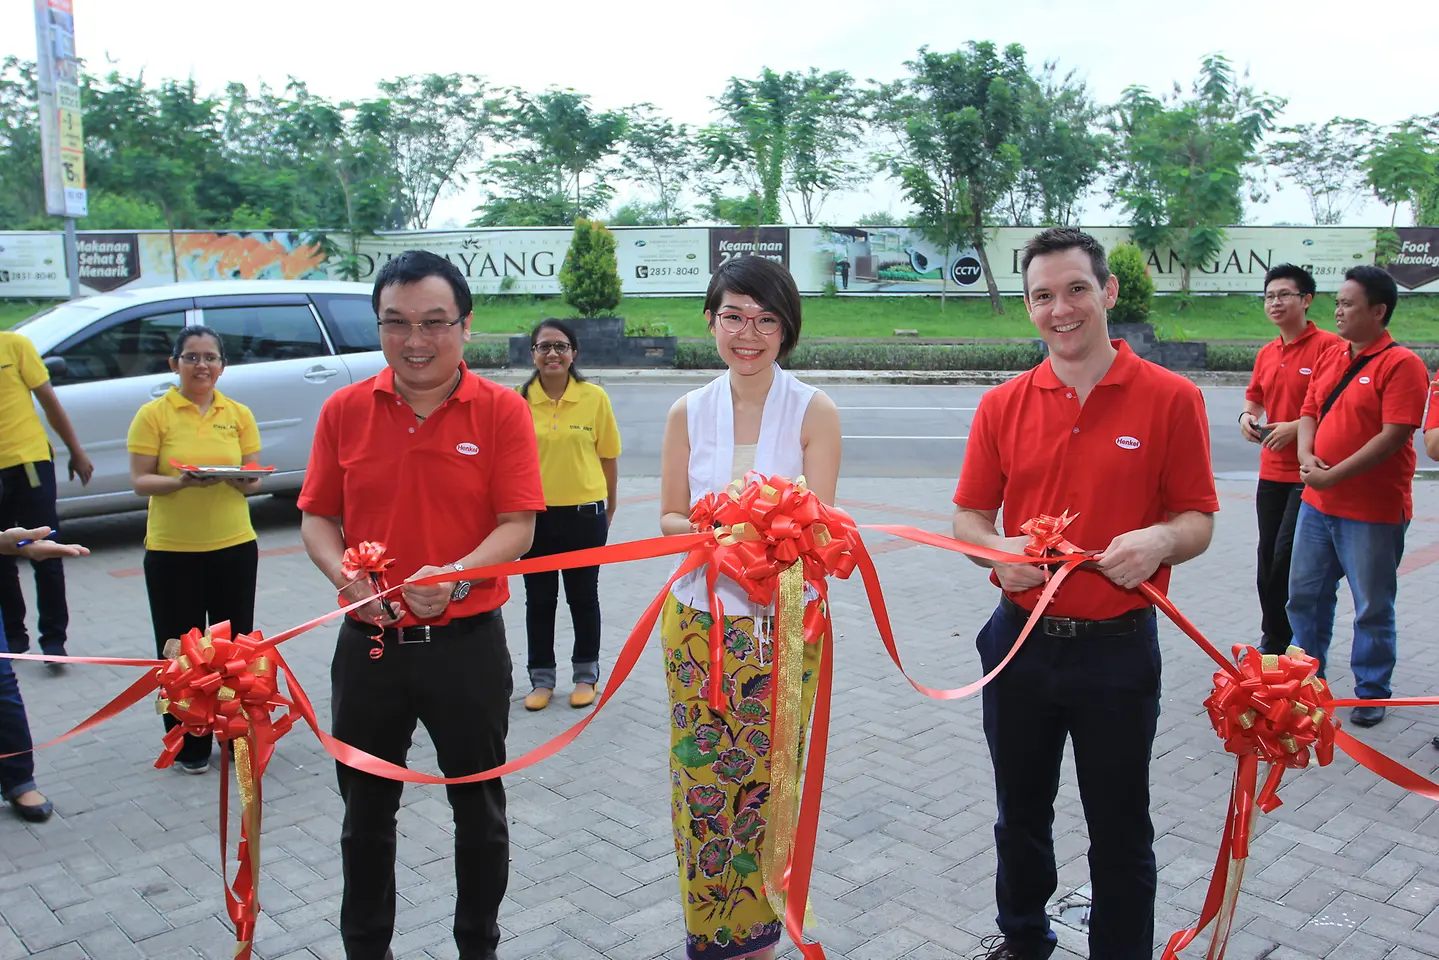 (From left): Lucky Lee, Head of Adhesive Technologies, Henkel Indonesia, Amelia Simadibrata and Dale Jamieson performed the official ribbon-cutting of the Pre-Applied Application Center.